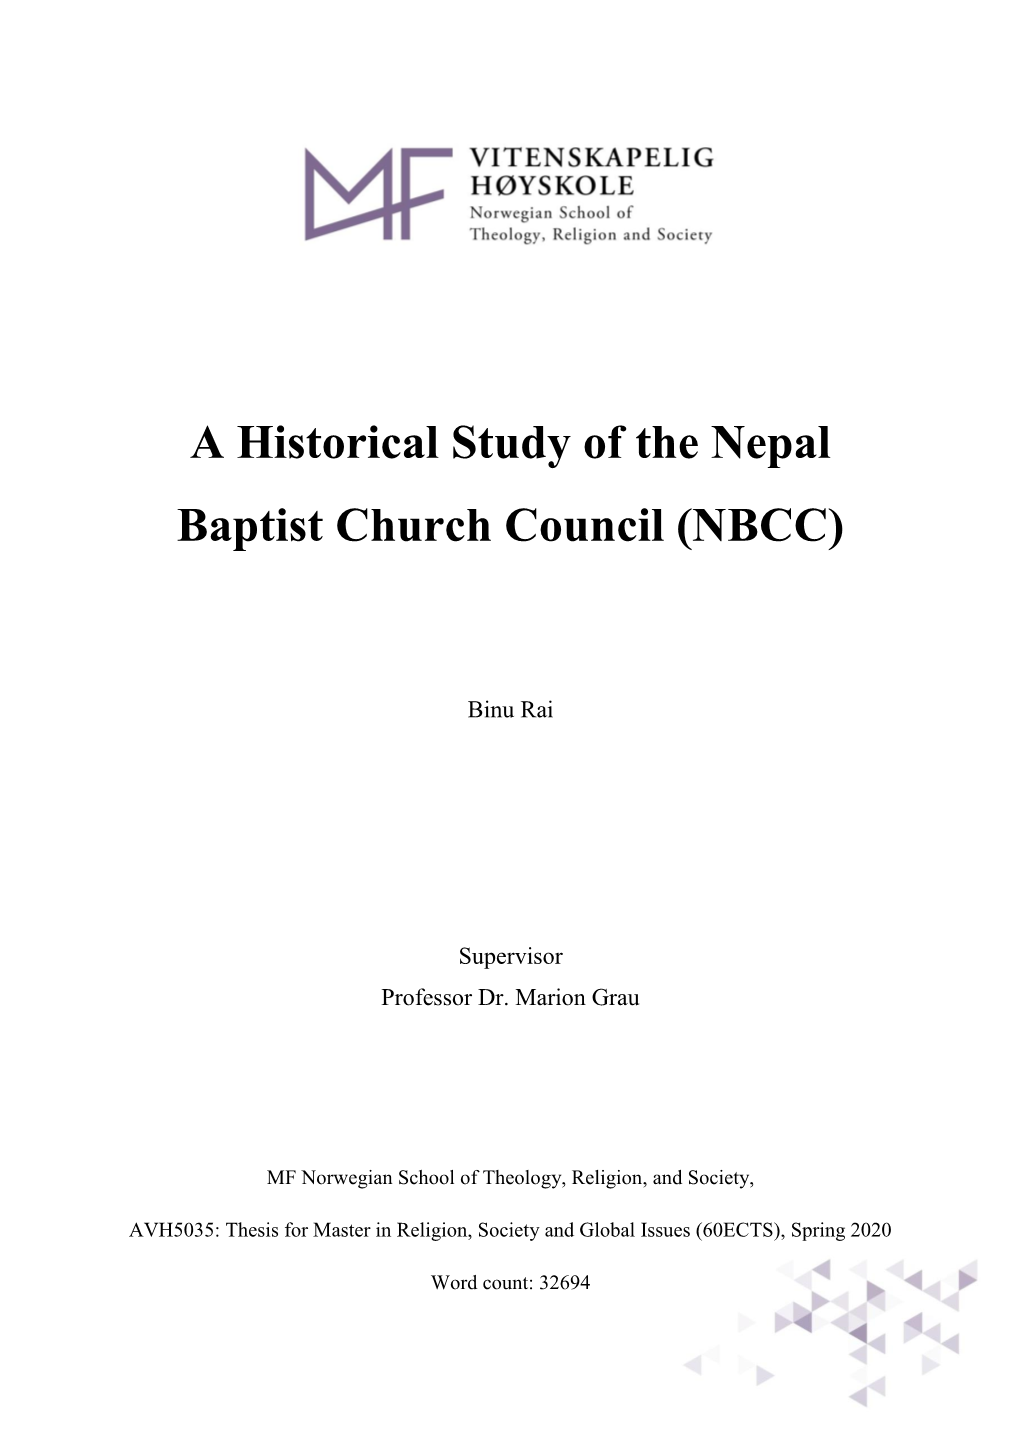 A Historical Study of the Nepal Baptist Church Council (NBCC)